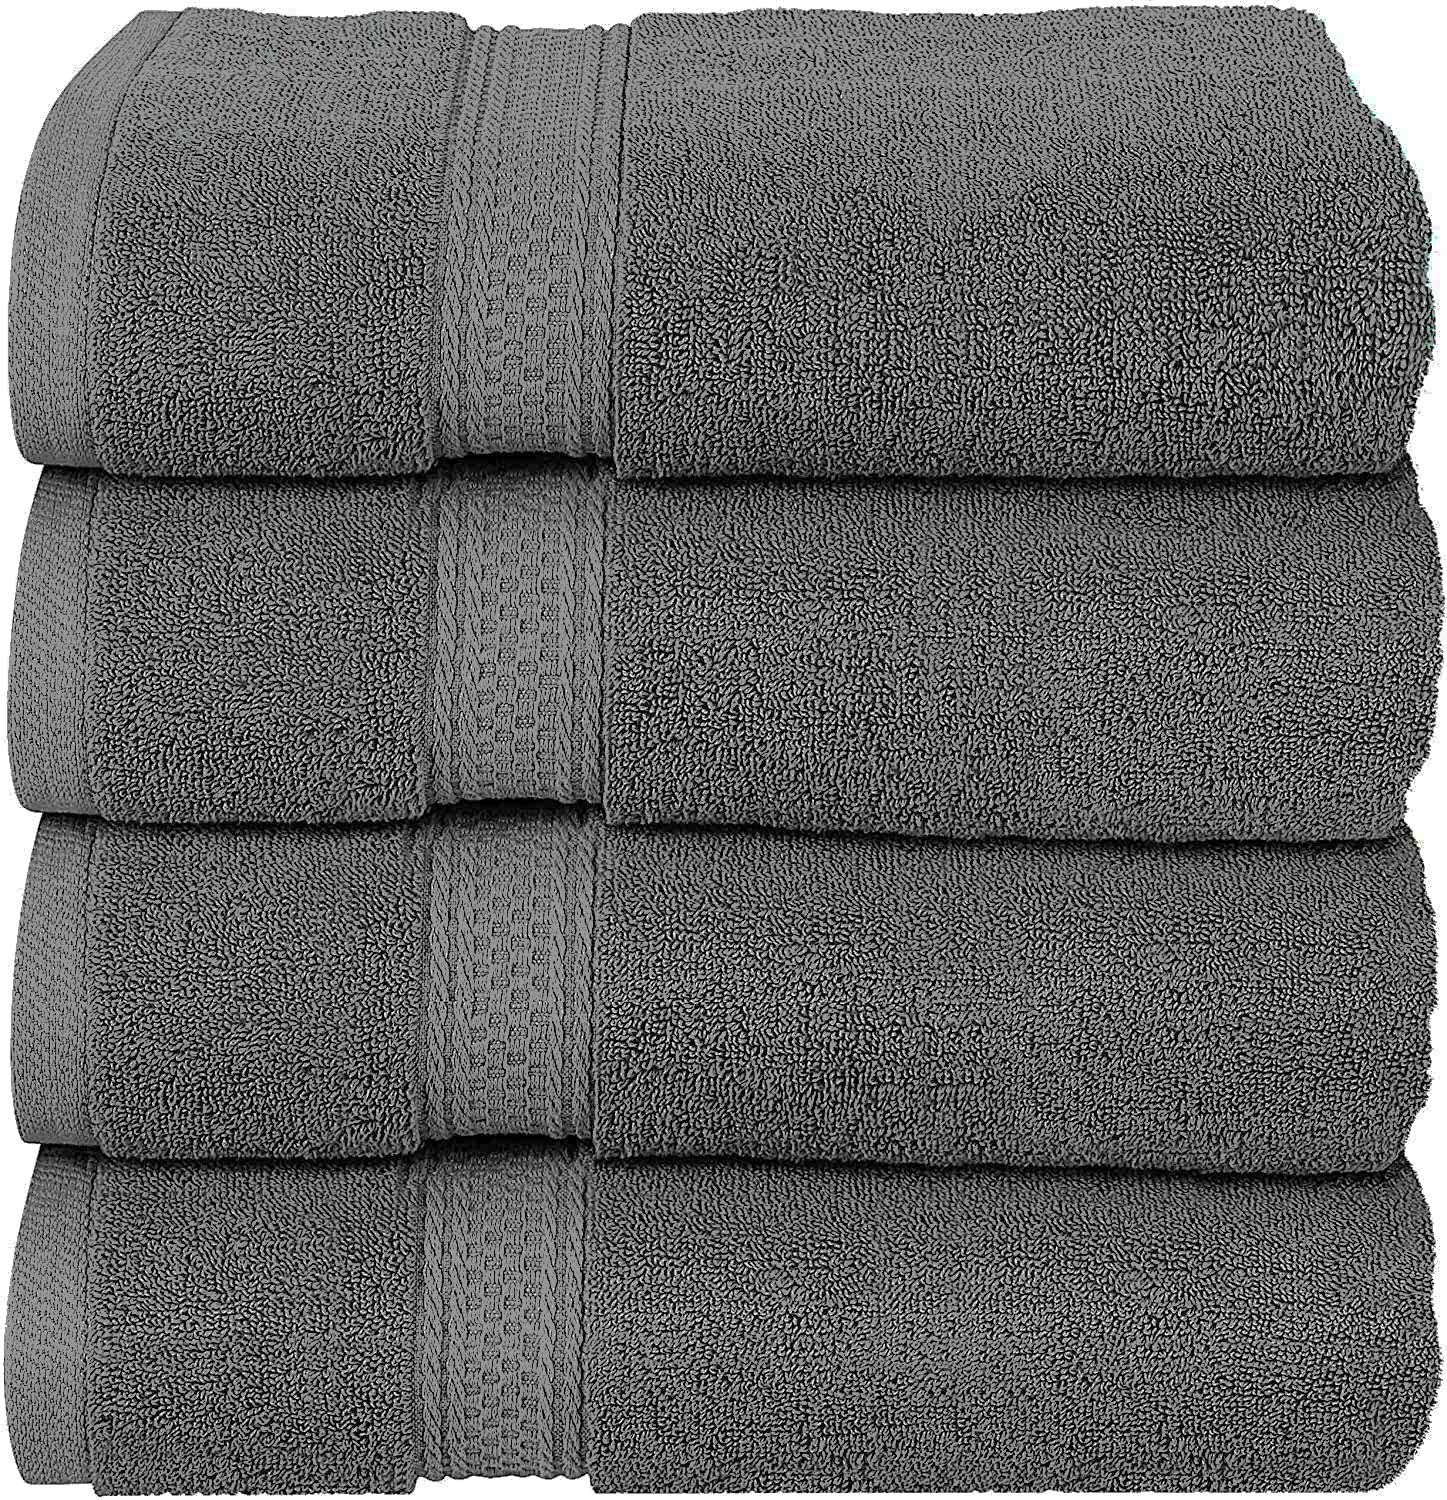 12 x 12 Inches, Grey 600 GSM 100% Cotton Details about   Utopia Towels Premium Washcloth Set 